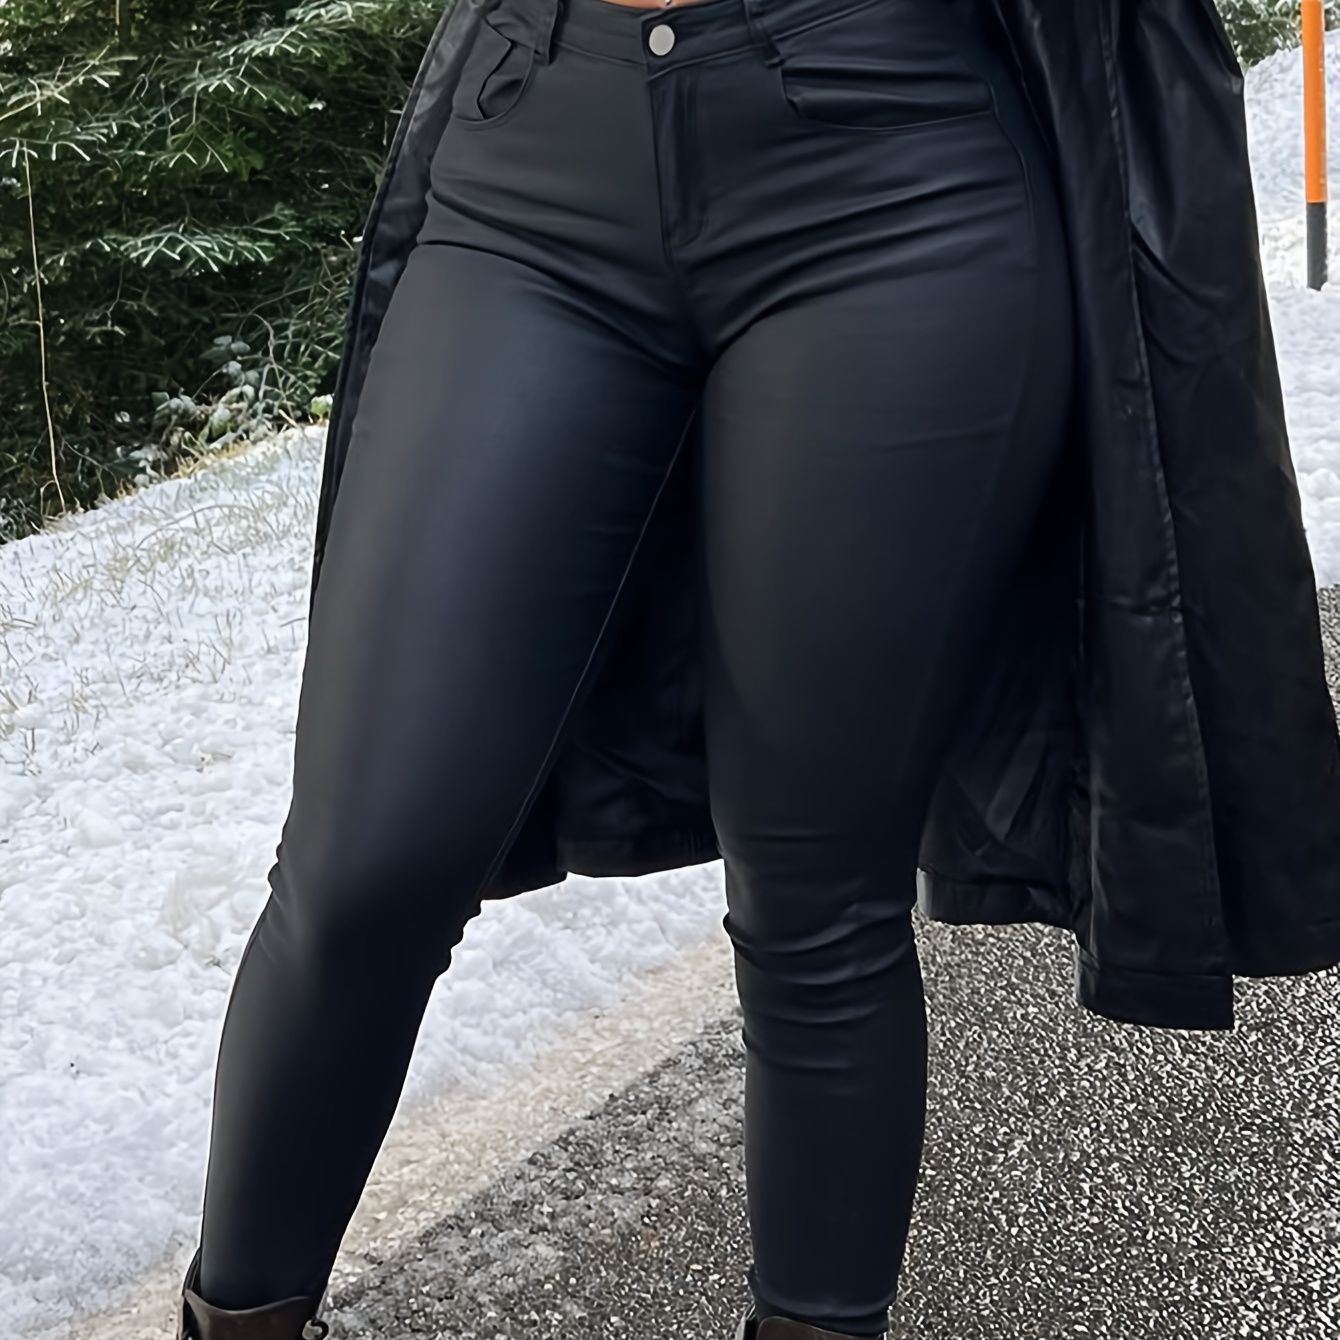 

Faux Leather Skinny Pants, Sexy High Waist Pants For Every Day, Women's Clothing